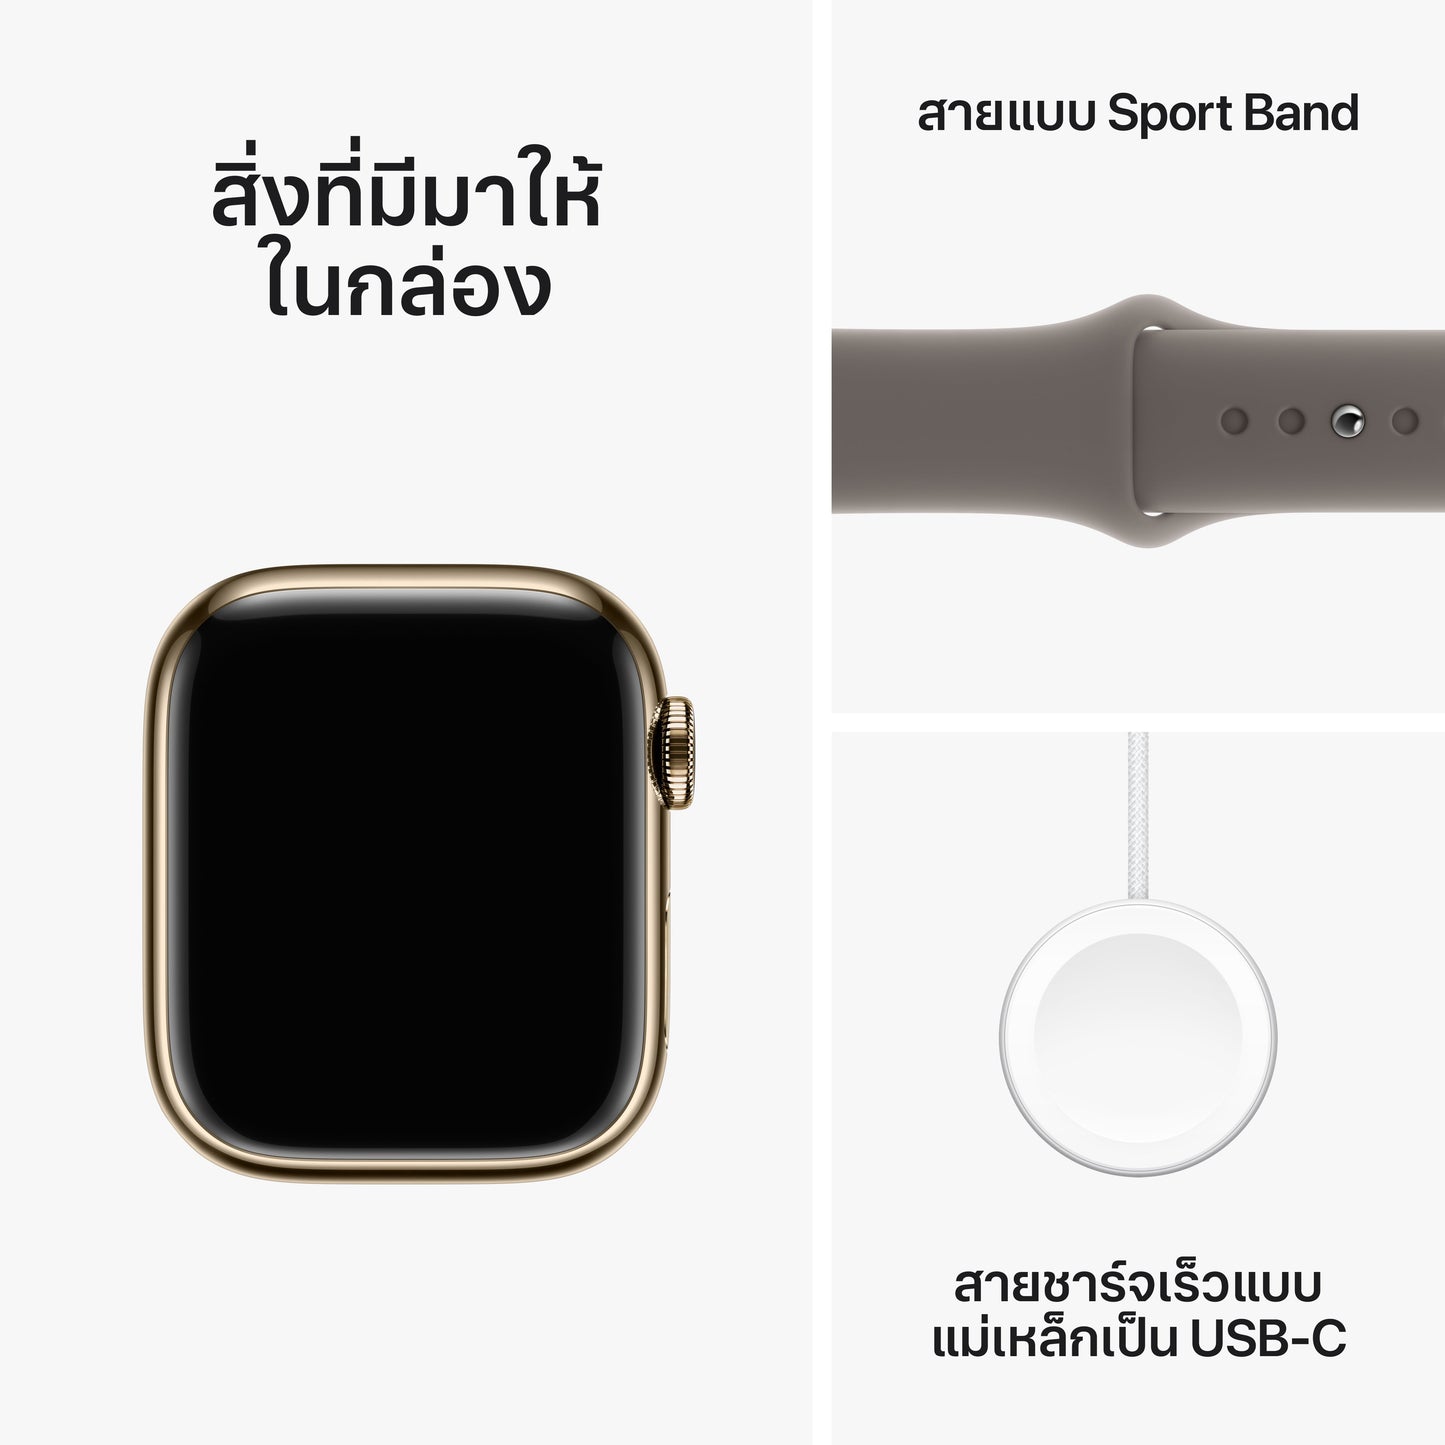 Apple Watch Series 9 GPS + Cellular 41mm Gold Stainless Steel Case with Clay Sport Band - S/M